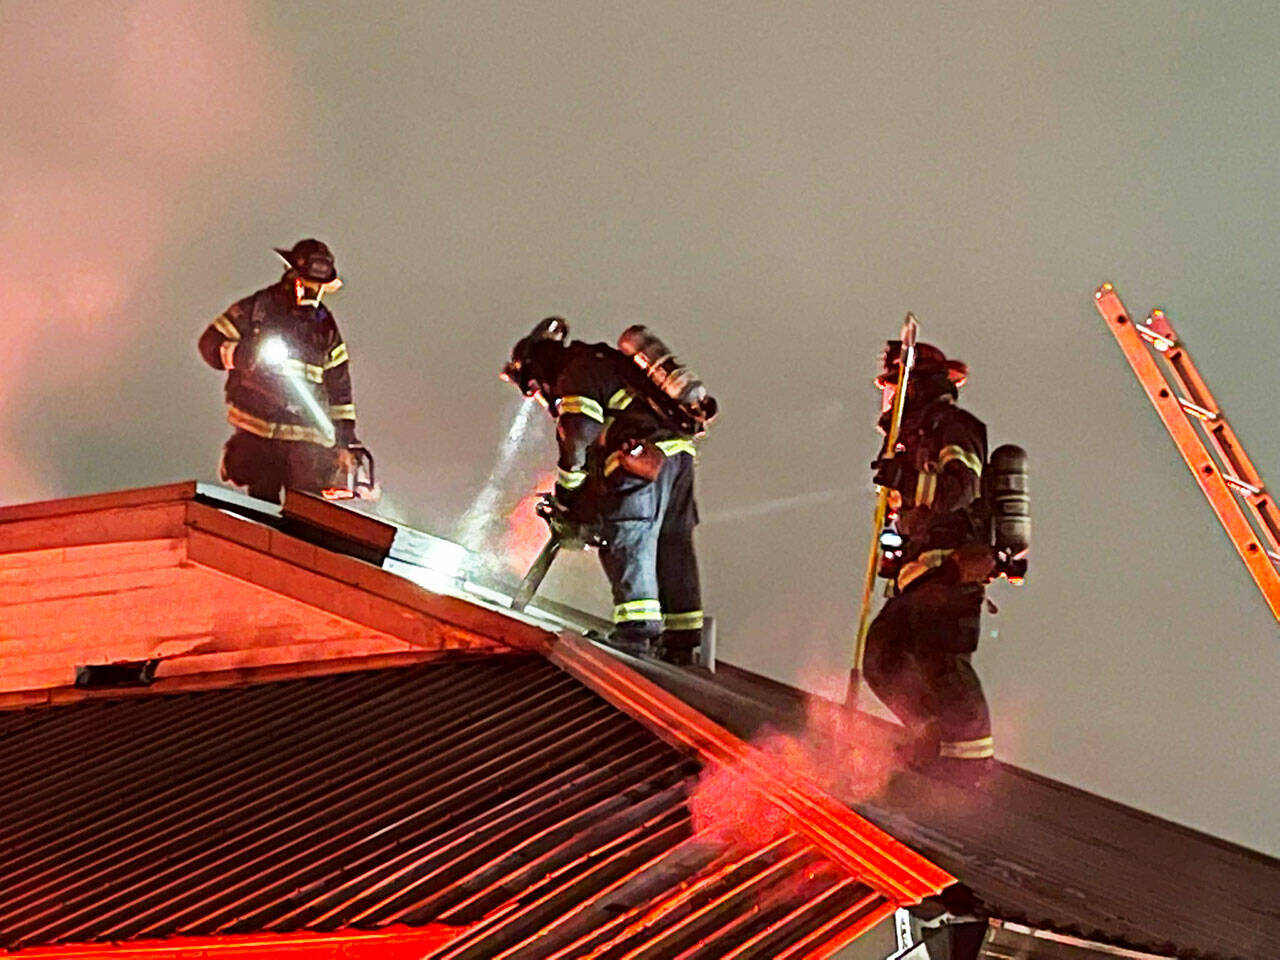 Firefighters on the roof of a fire early Wednesday, Oct. 5 at All Seasons Dental Care, 120 State Ave. N. COURTESY PHOTO, Puget Sound Fire